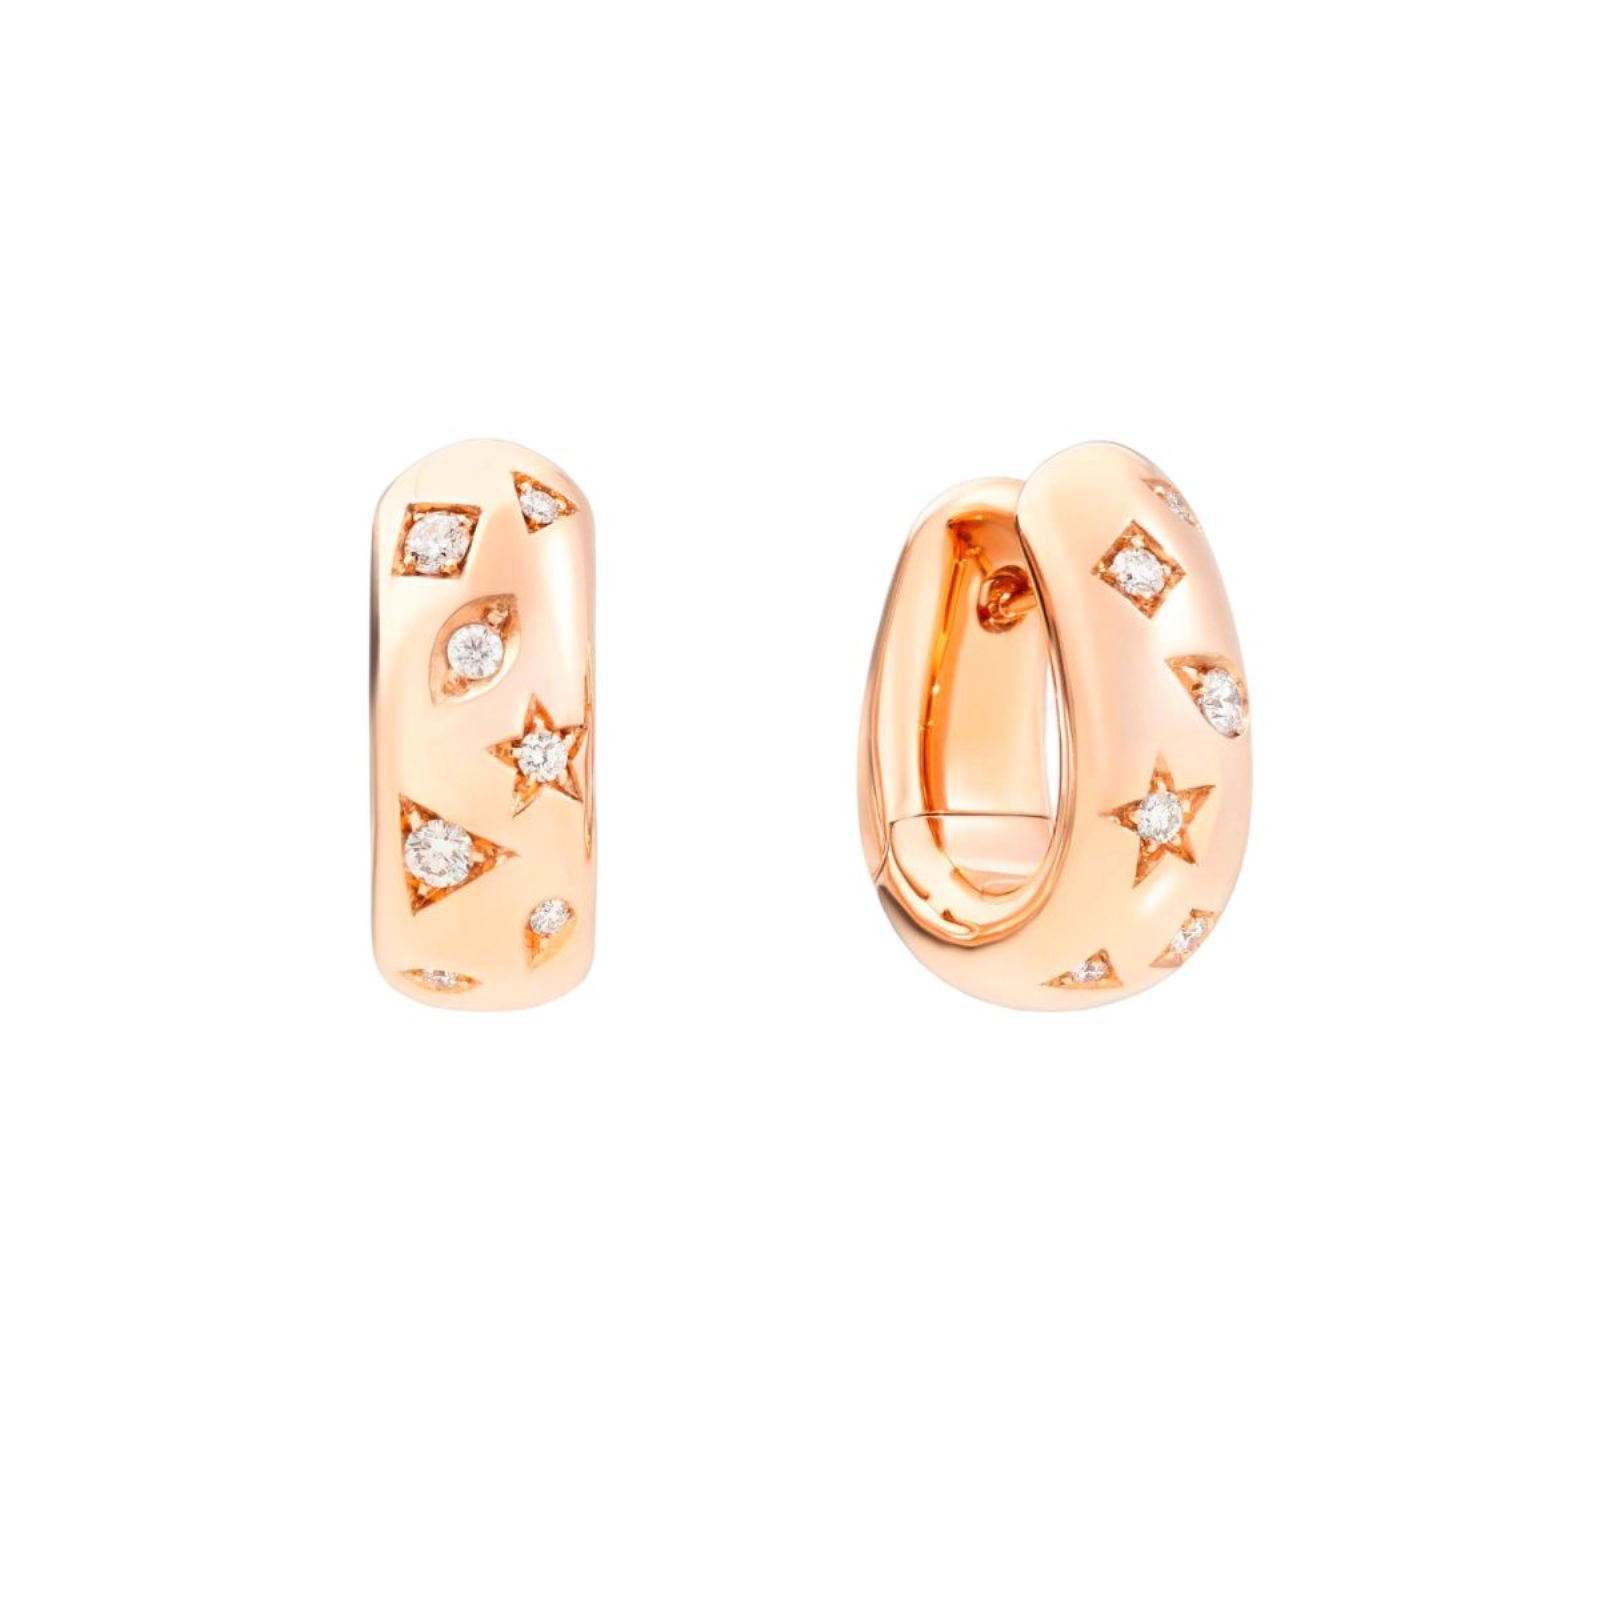 GOLD AND DIAMOND ICONICA HOOP EARRINGS